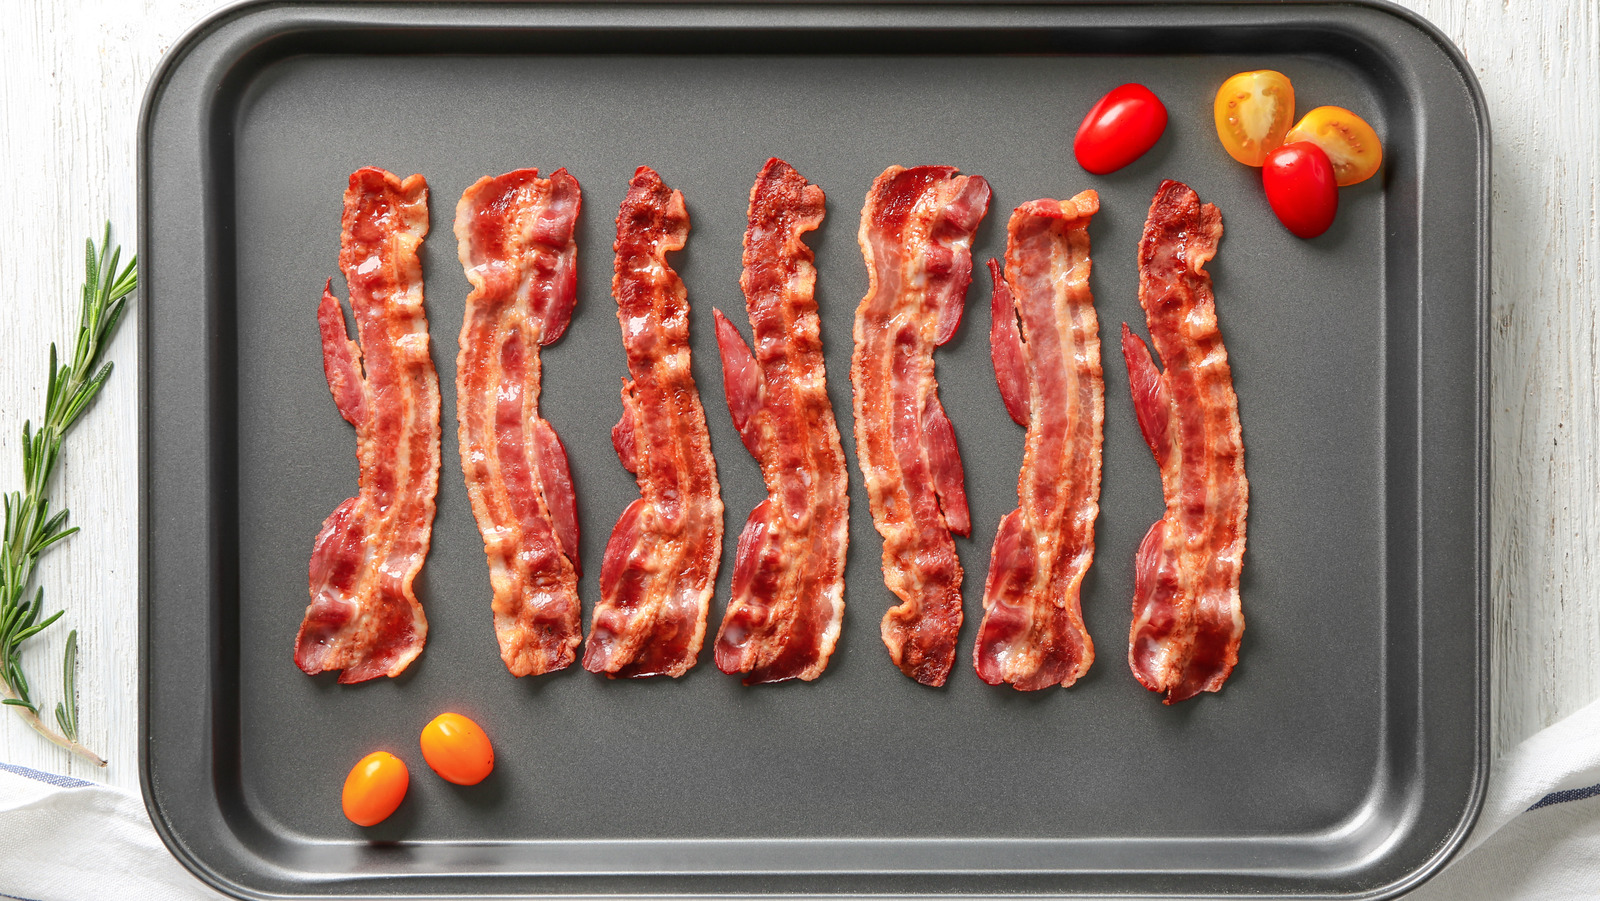 https://www.tastingtable.com/img/gallery/how-to-prevent-bacon-from-sticking-to-your-baking-sheet/l-intro-1660569213.jpg